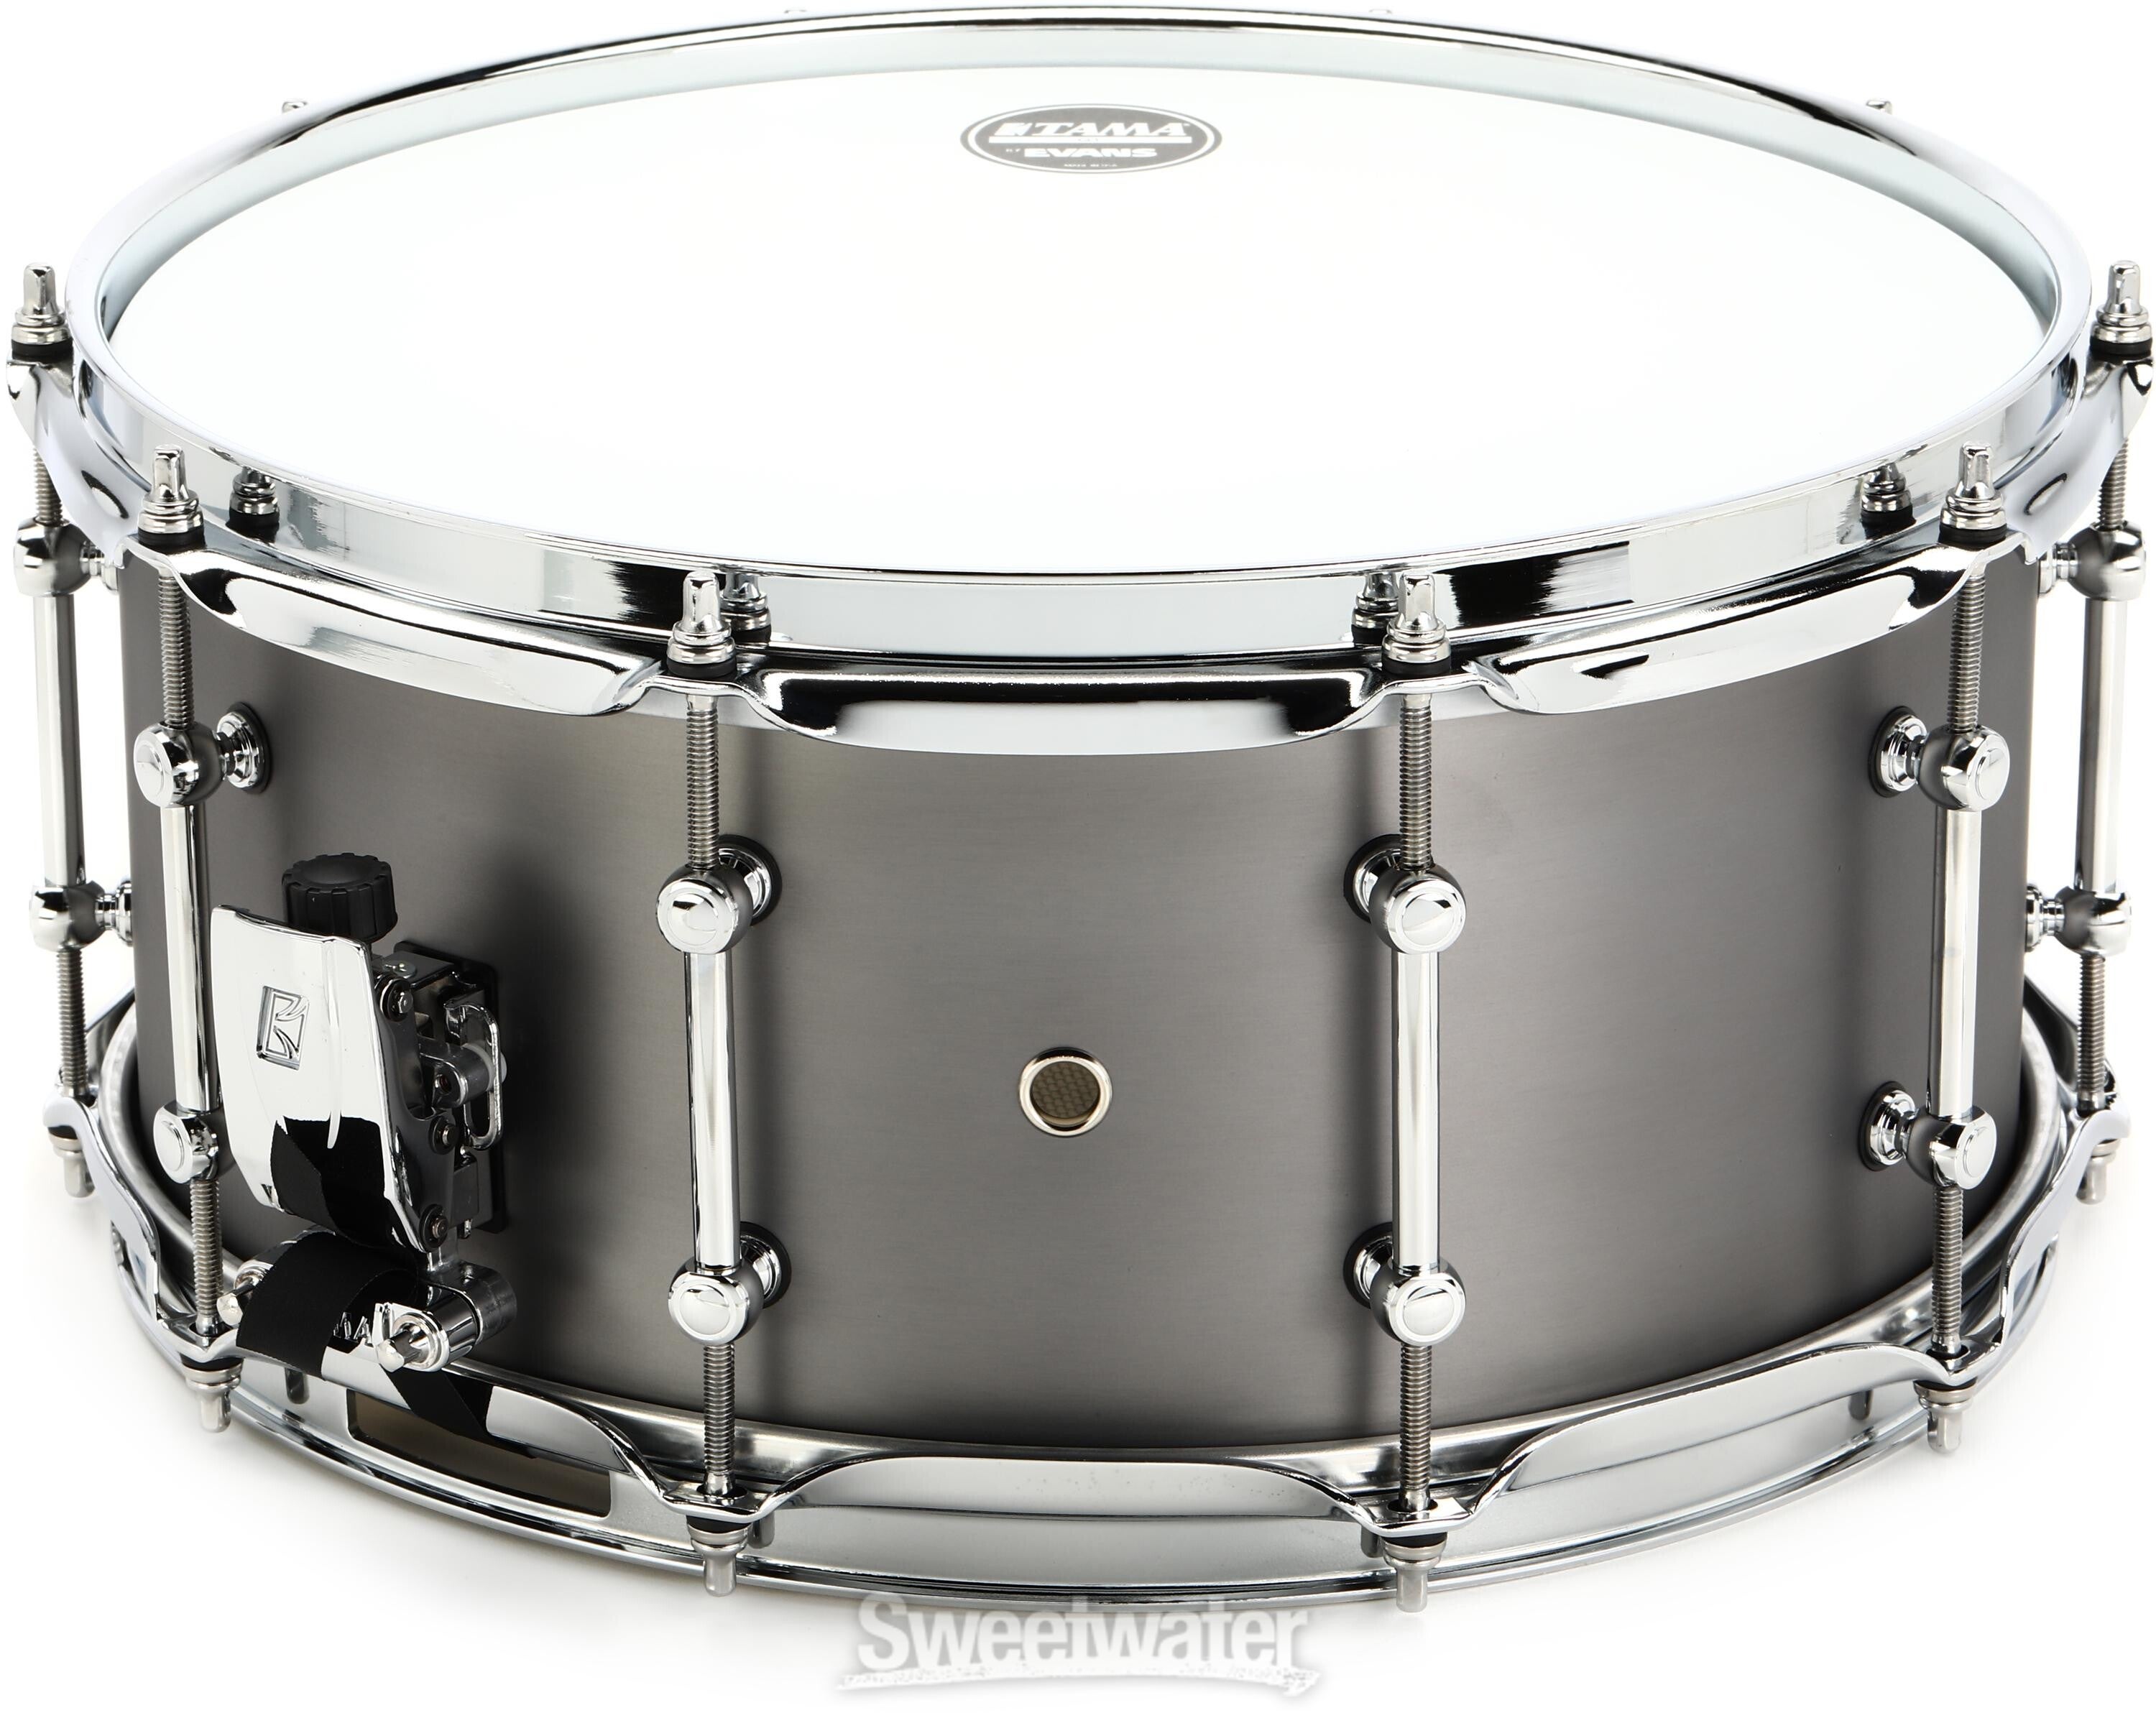 Tama S.L.P. Sonic Stainless Steel Snare Drum - 6.5 x 14 inch